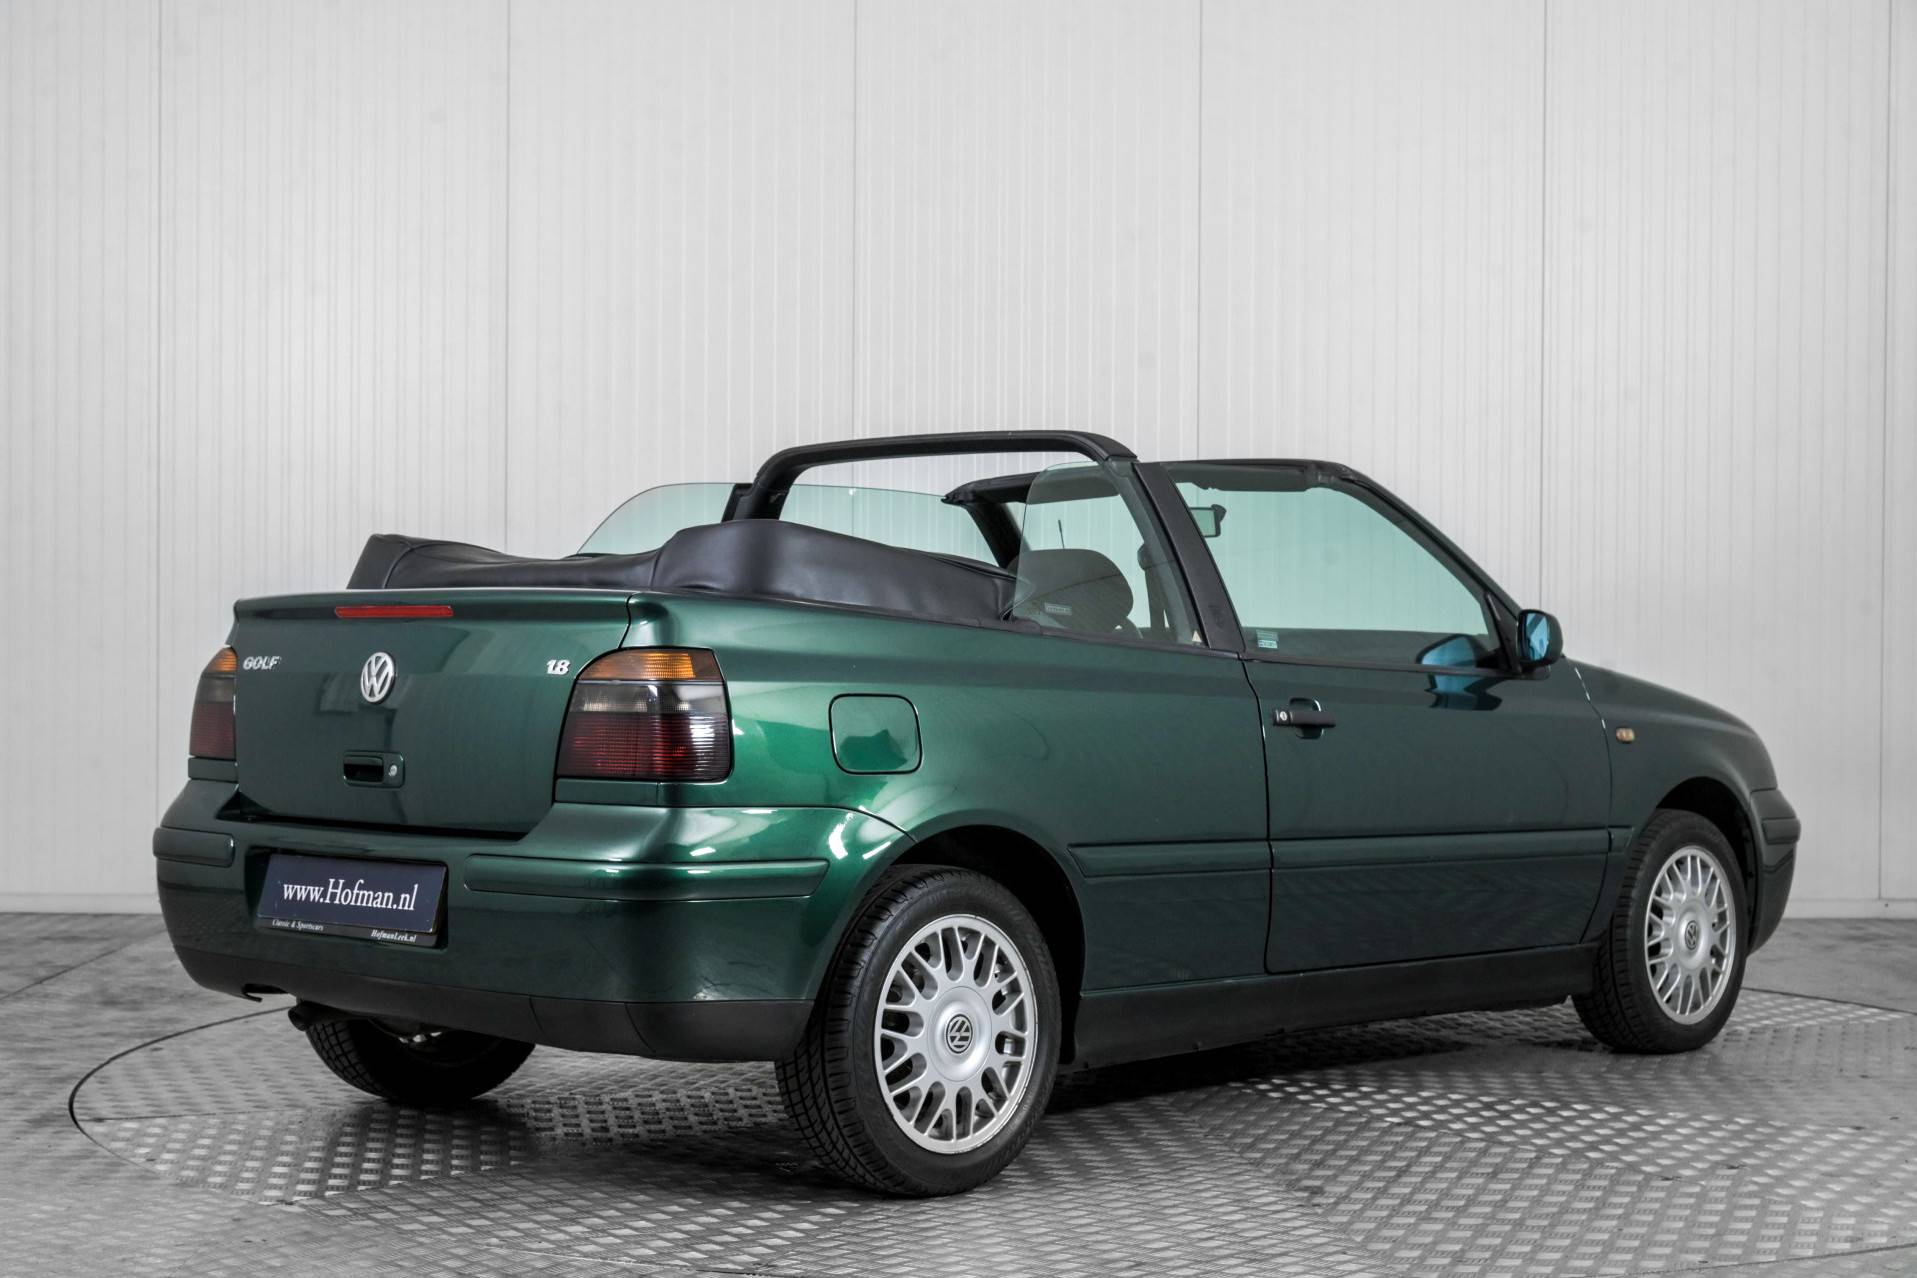 For Sale: Volkswagen Golf IV Cabrio 1.8 (1999) offered for €7,900